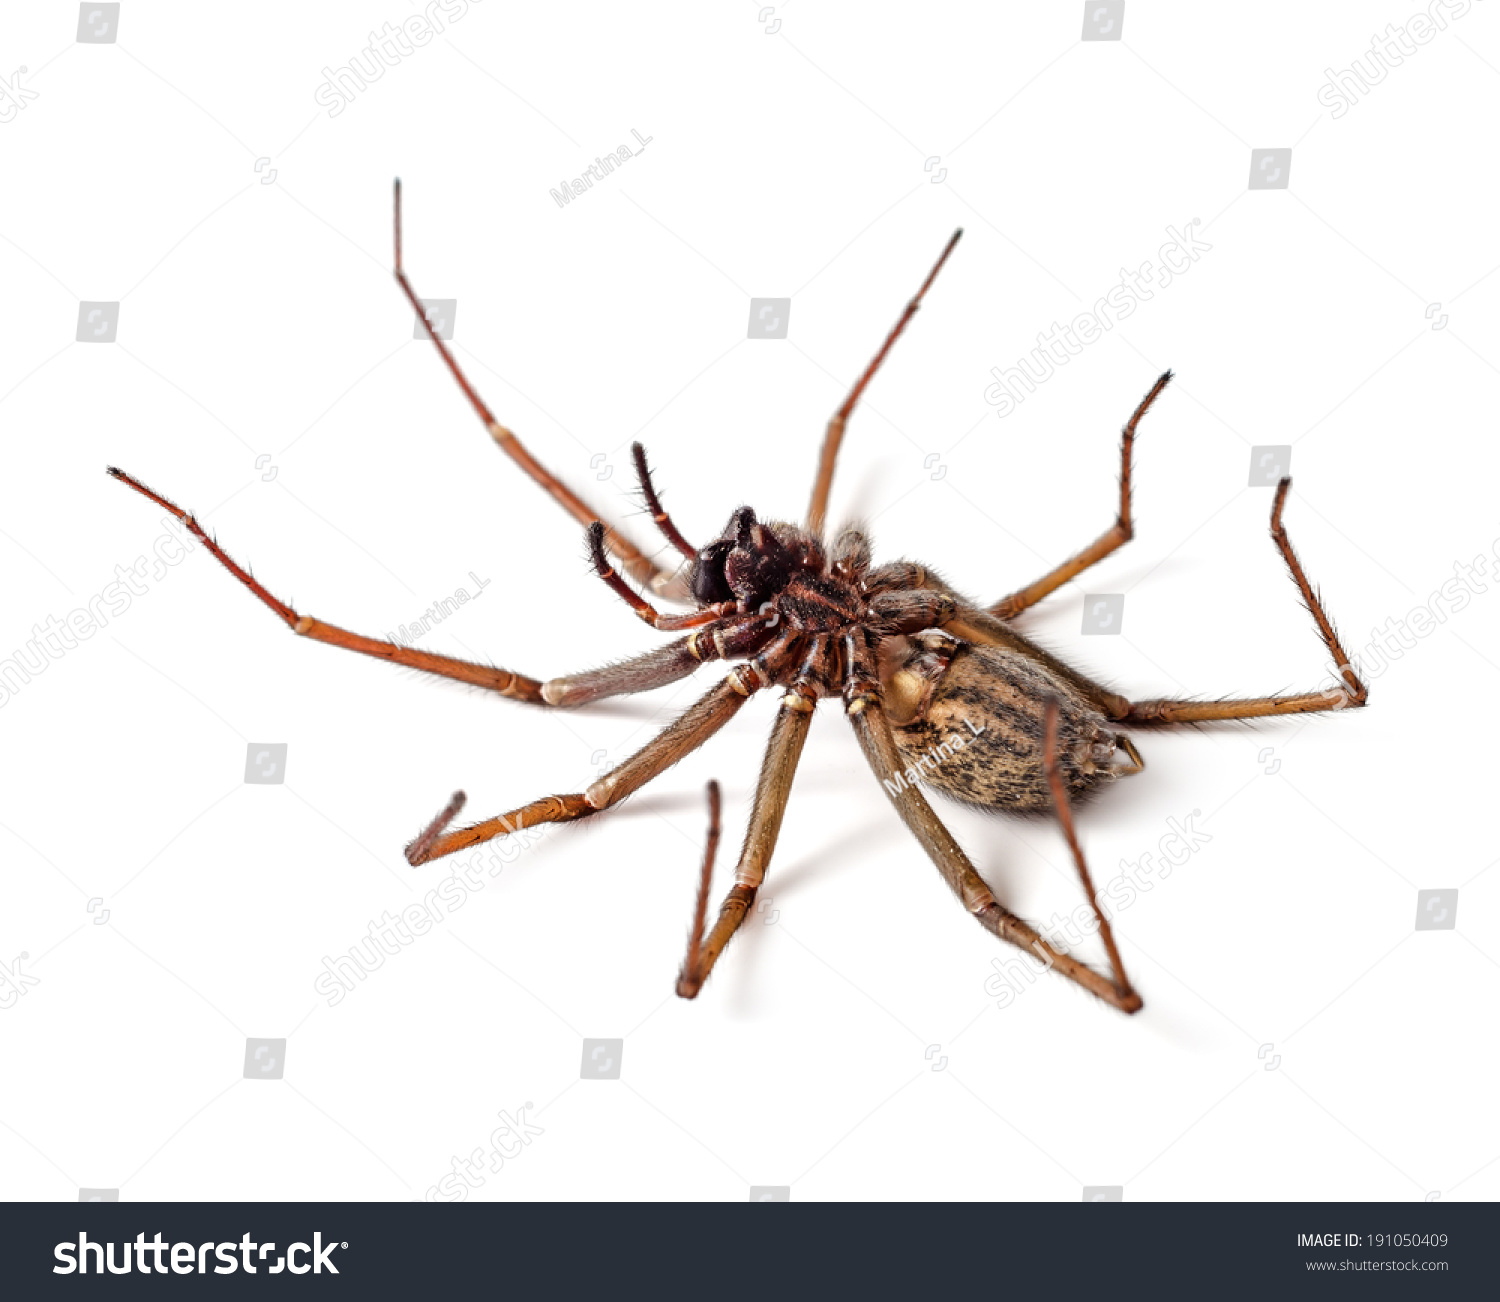 Dead Deadly Spider Isolated On White Stock Photo 191050409 ...